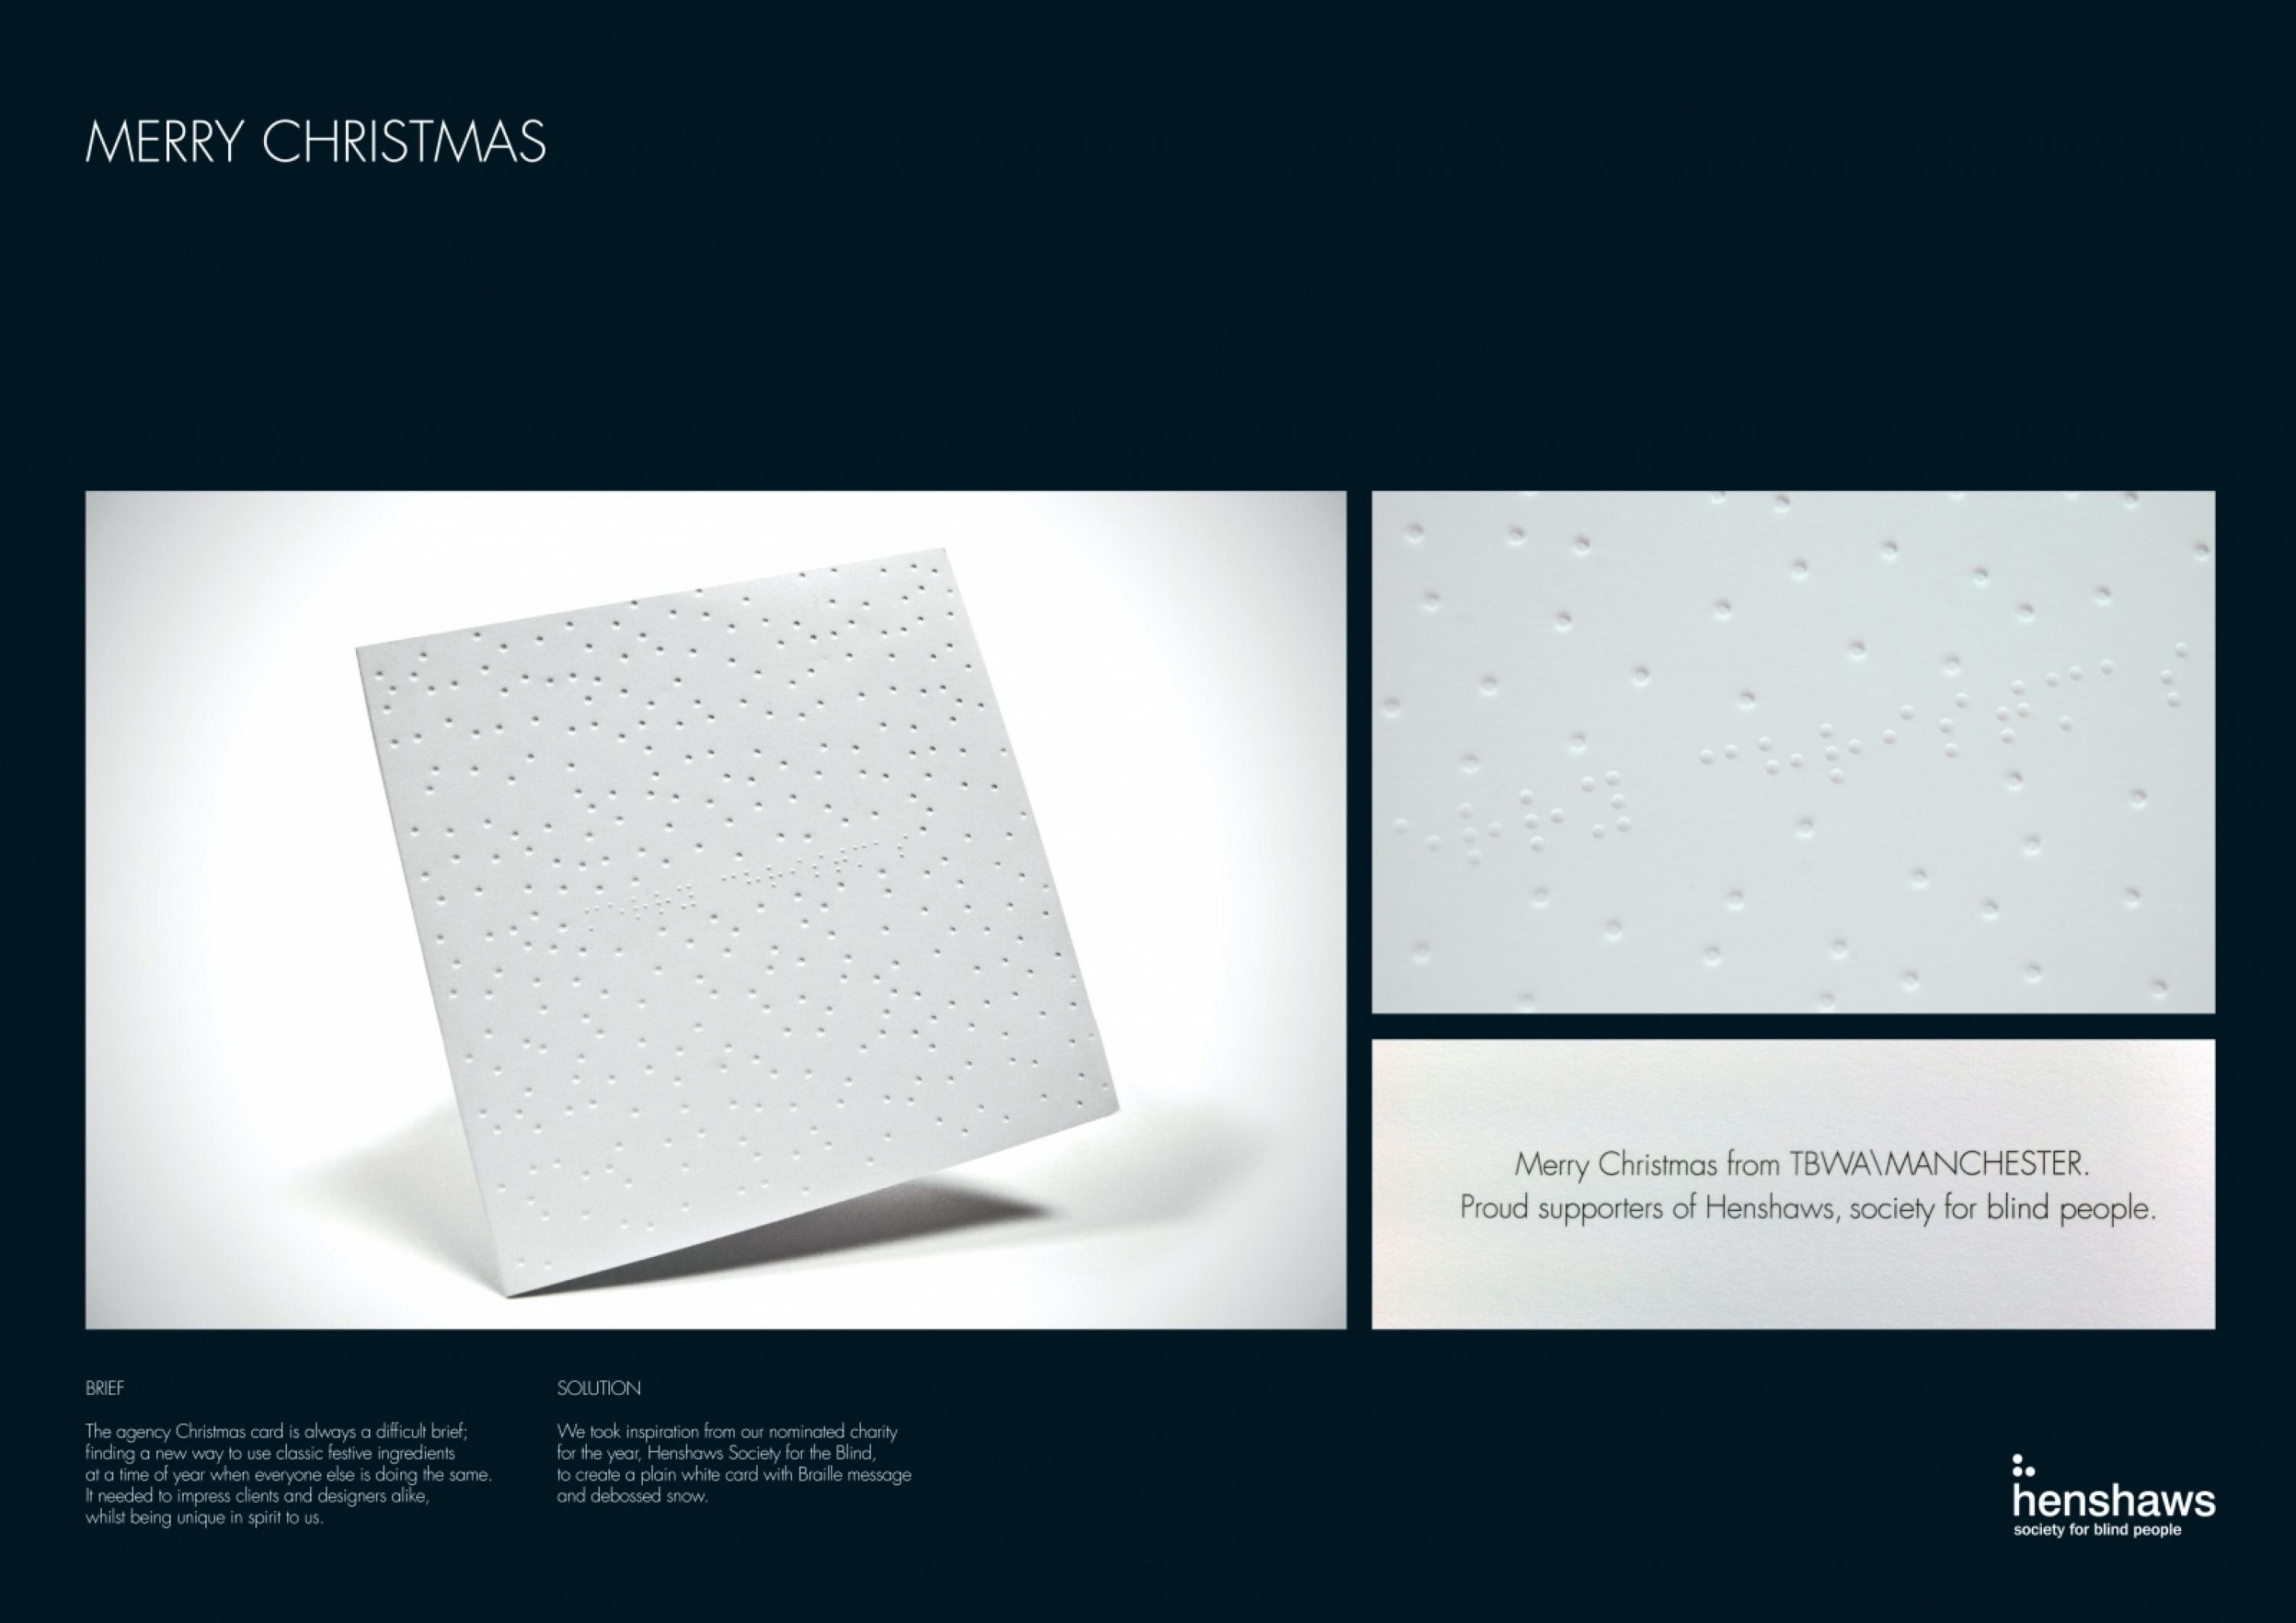 TBWA\MANCHESTER CHRISTMAS CARD